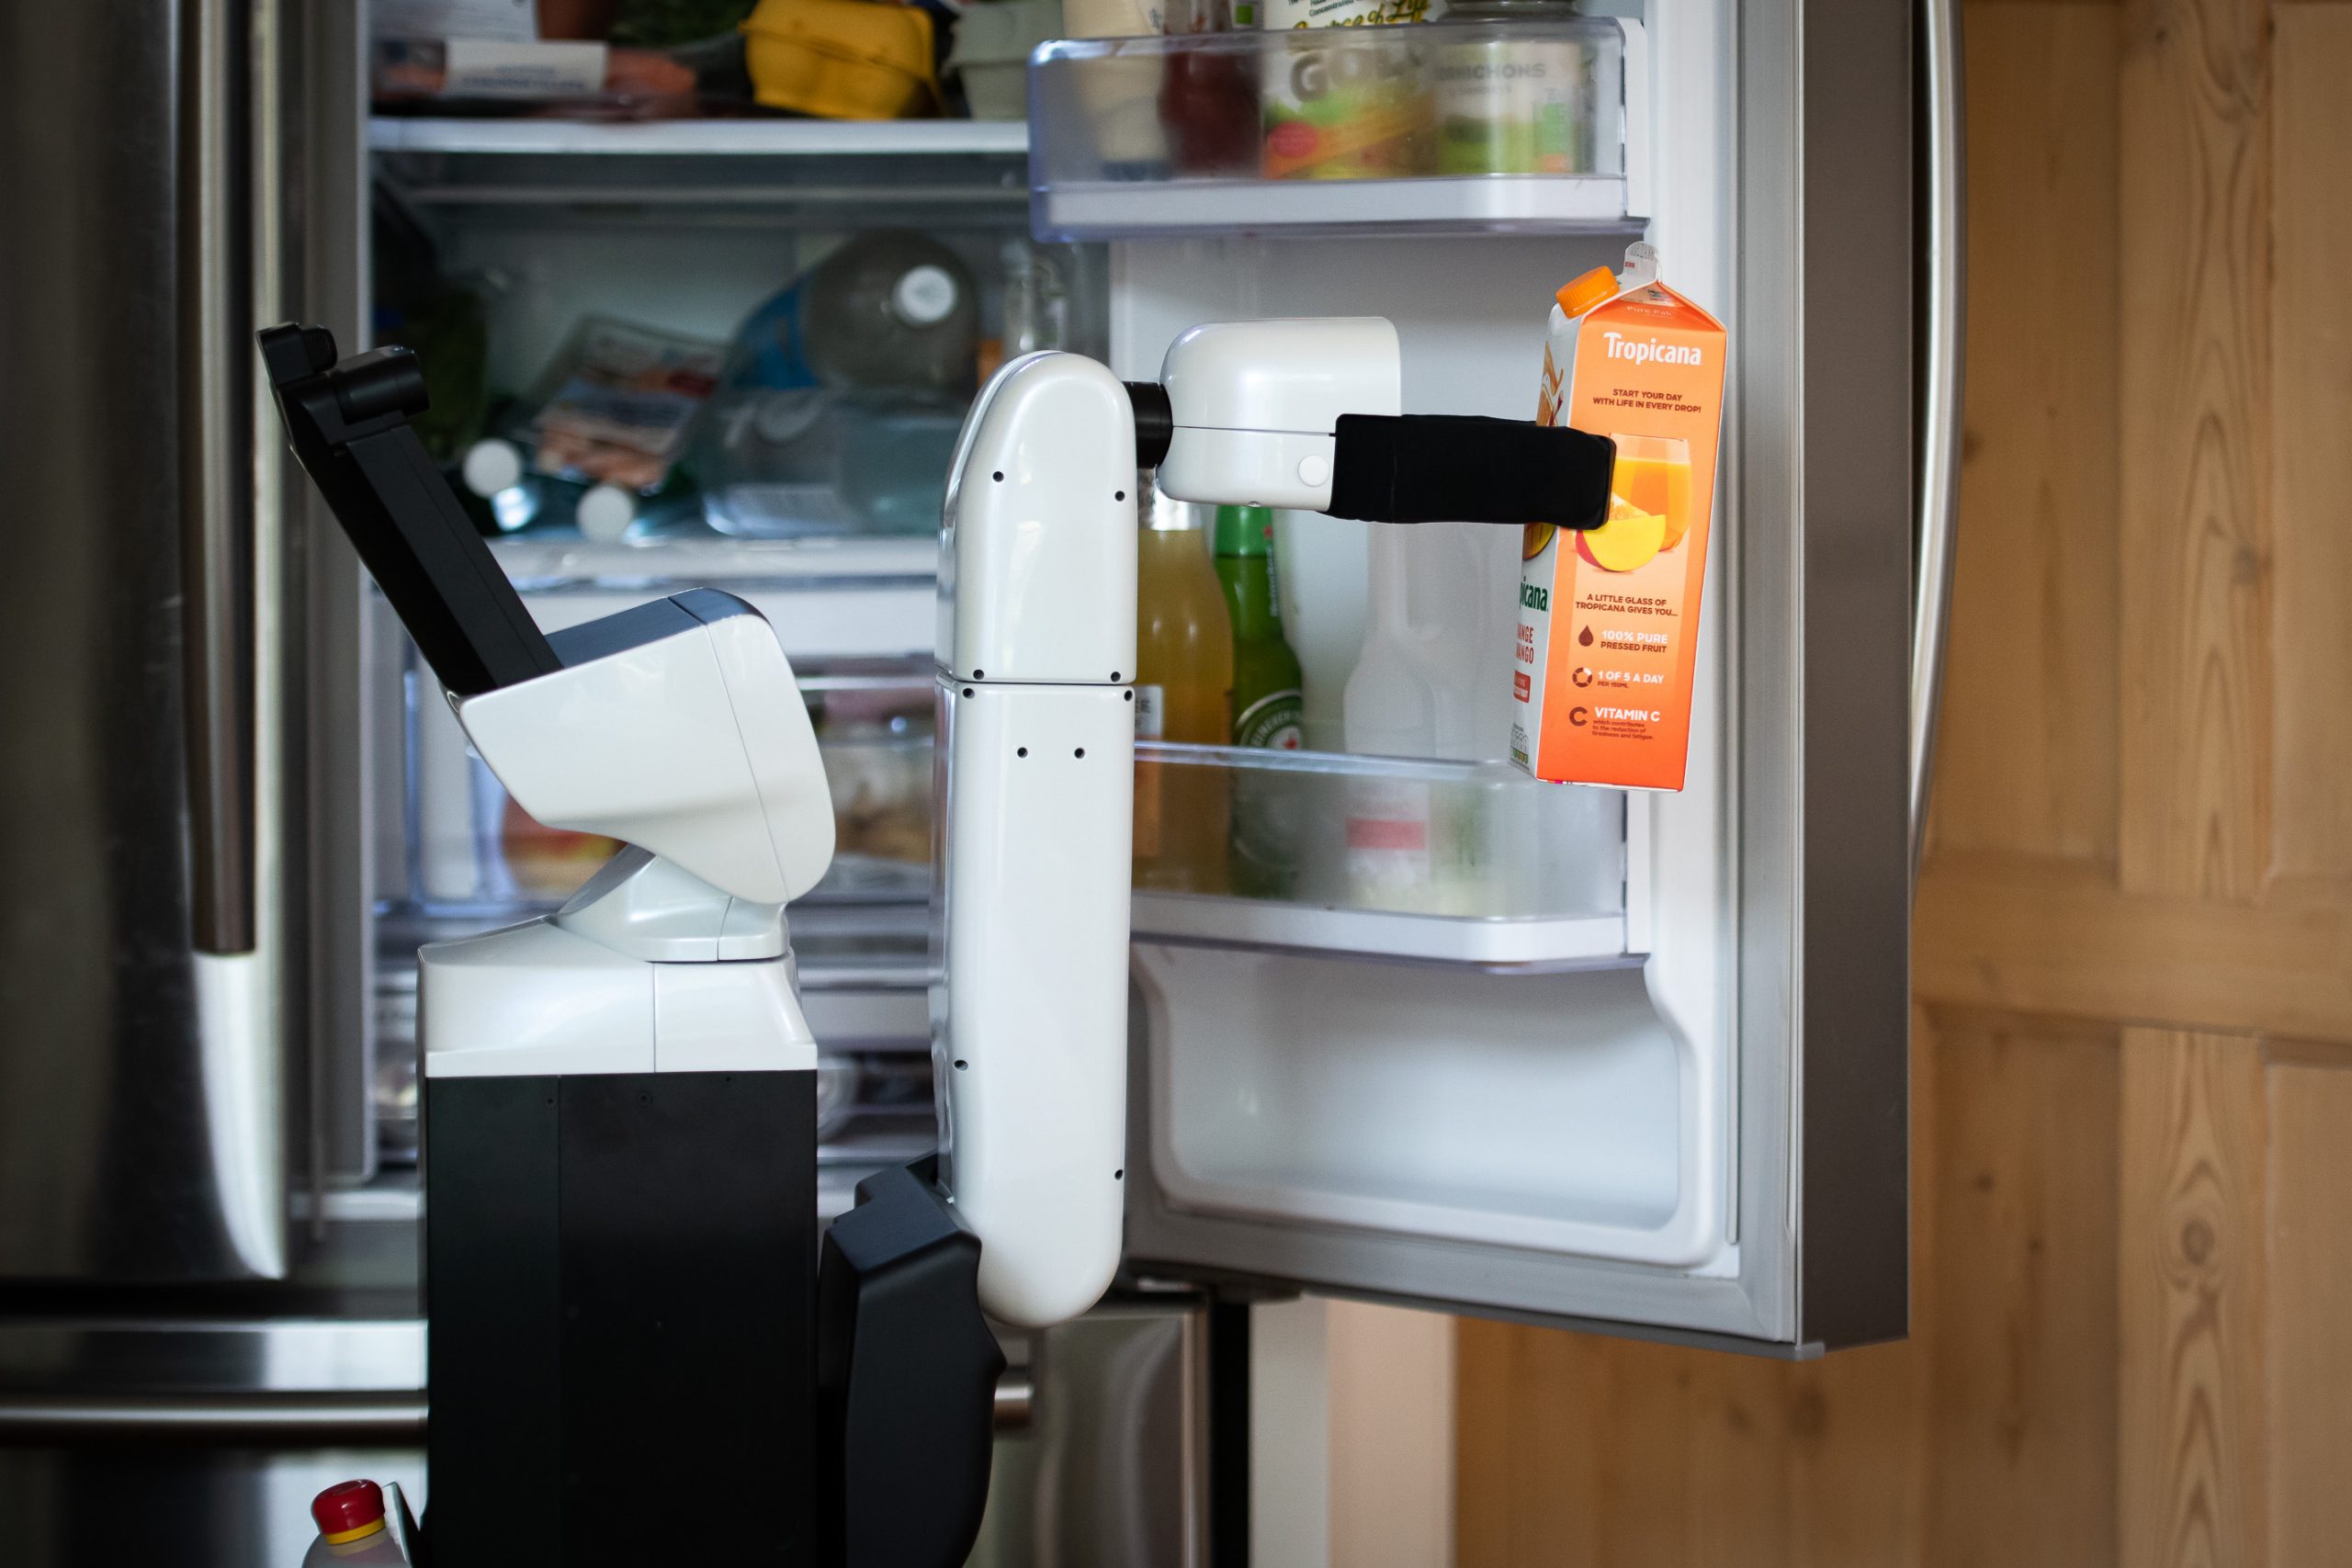 The Toyota Human Support Robot taking a orange juice carton from a fridge